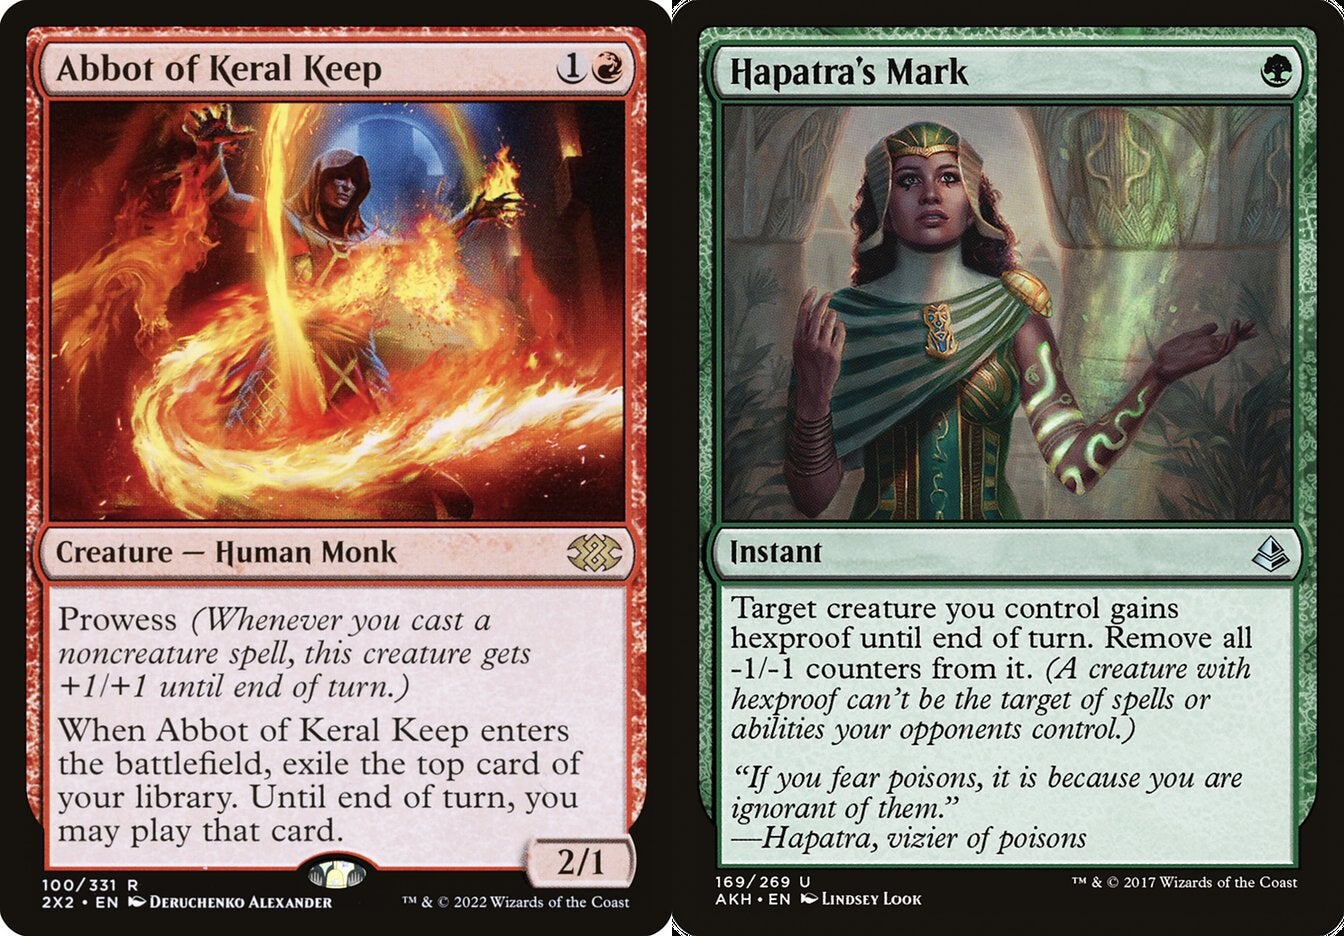 On the left is a red creature card with Prowess and on the right is a green instant card that grants Hexproof to a target creature—both are from Magic: The Gathering.